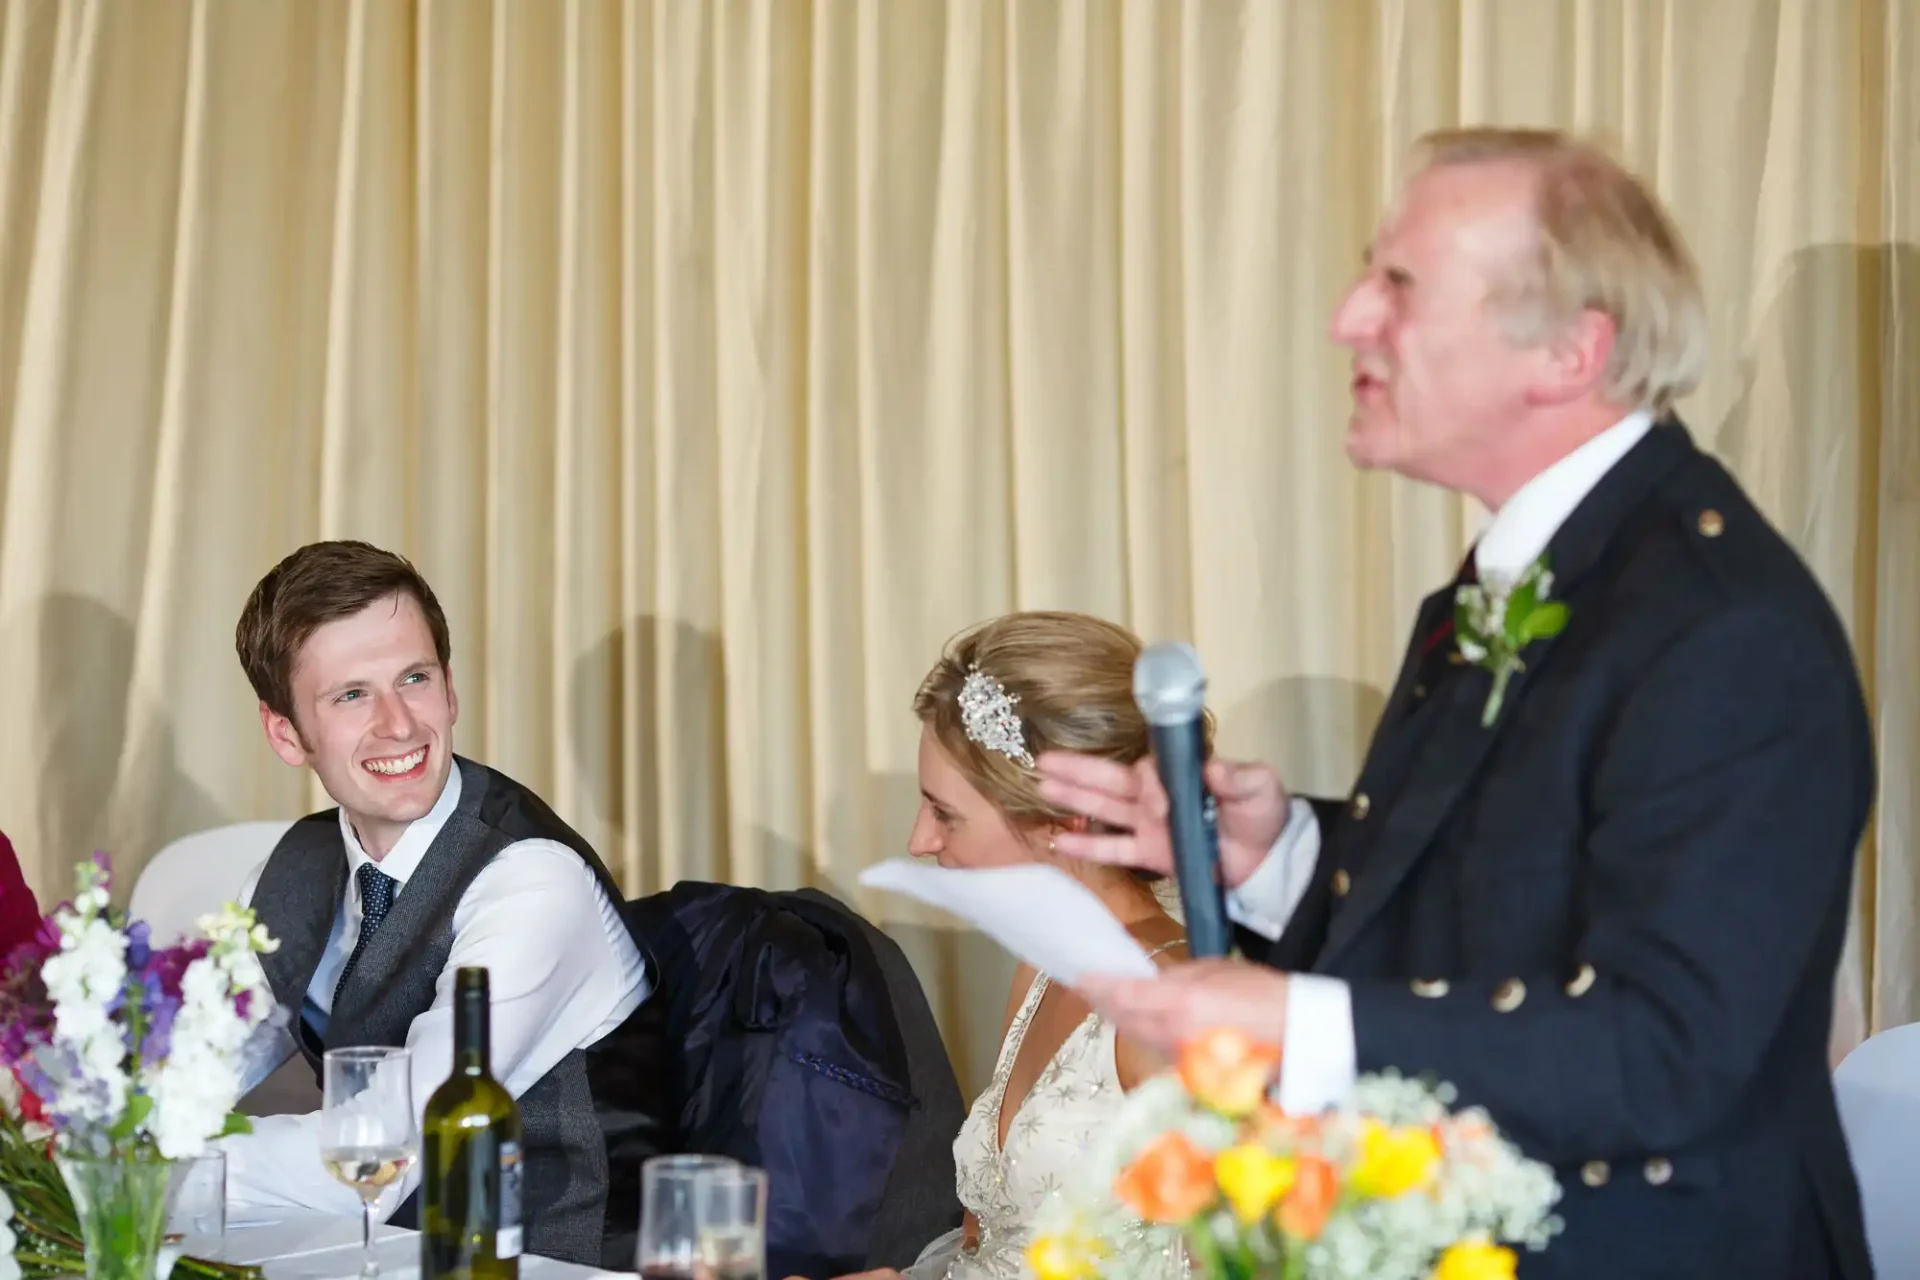 An older man gives a speech at a wedding reception, holding papers, as a smiling young man in a suit and a woman in a white dress look on at a decorated table.